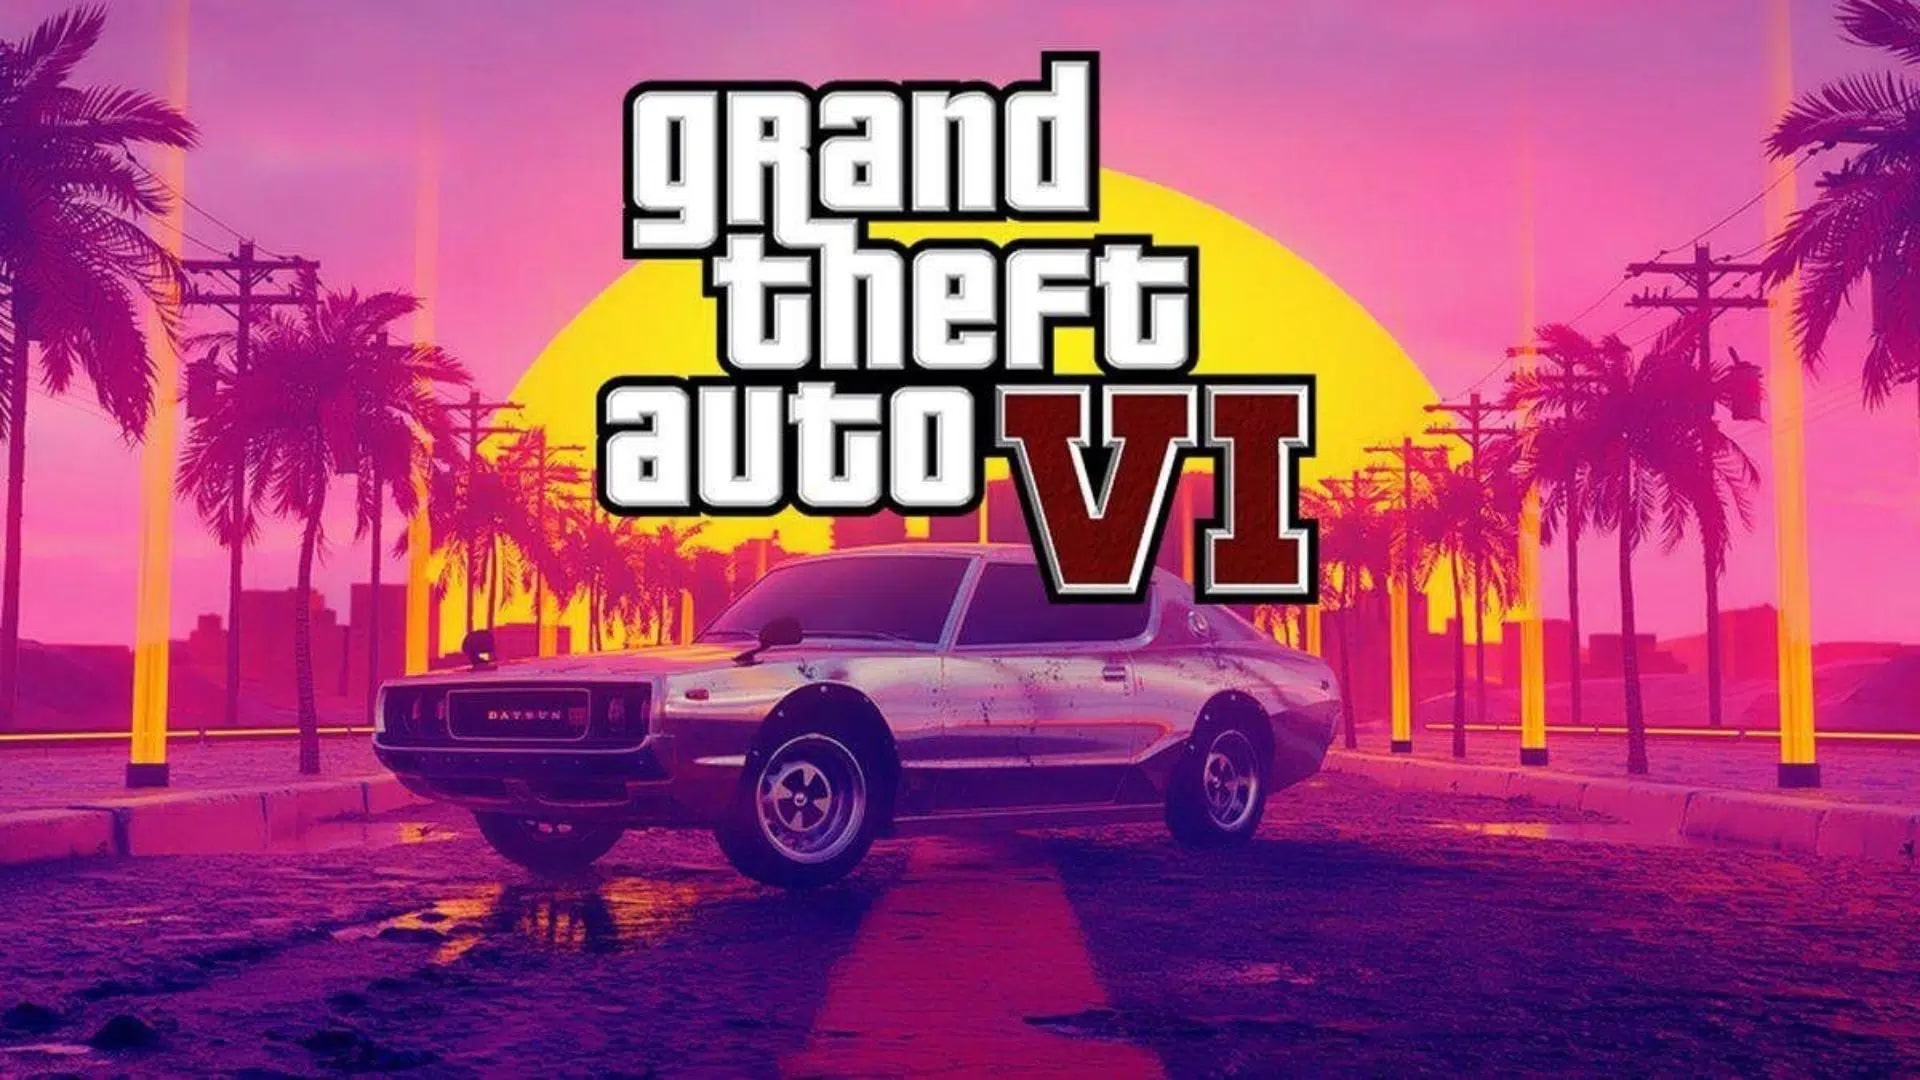 Breaking News: ‘Grand Theft Auto VI’ Trailer Leaks Day Early, Rockstar Yanks Footage